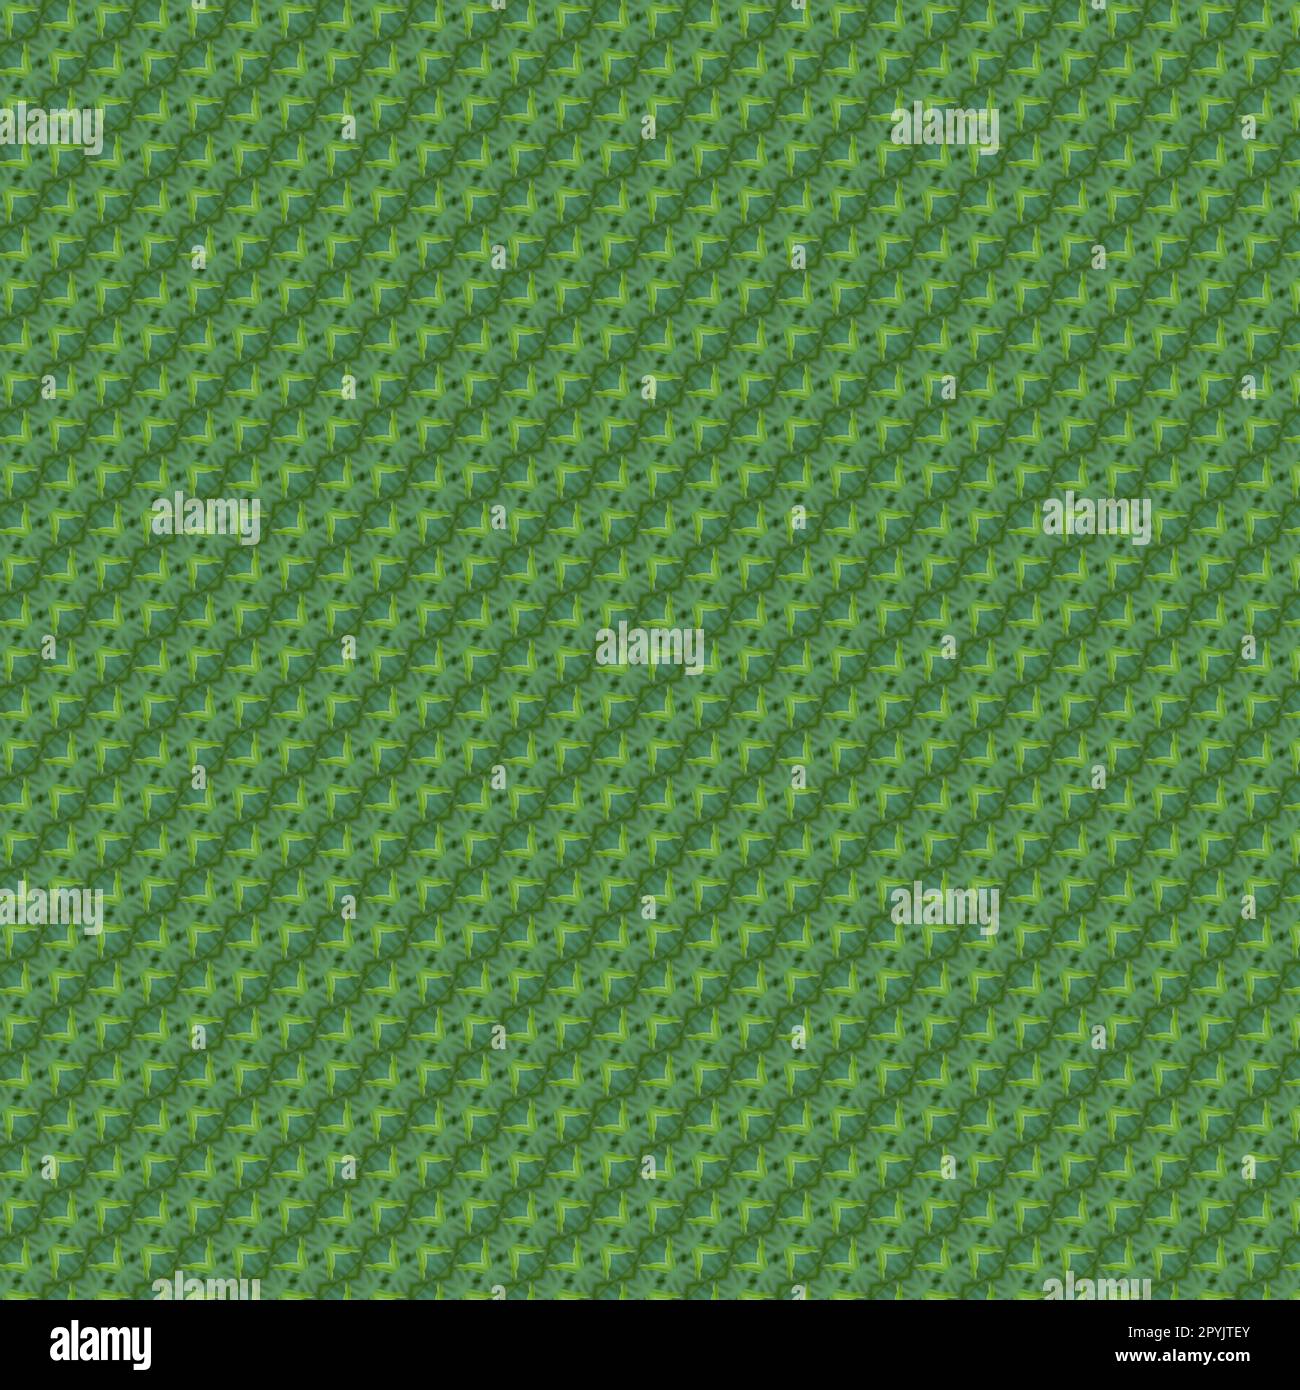 Abstract pattern of the green flora Stock Photo